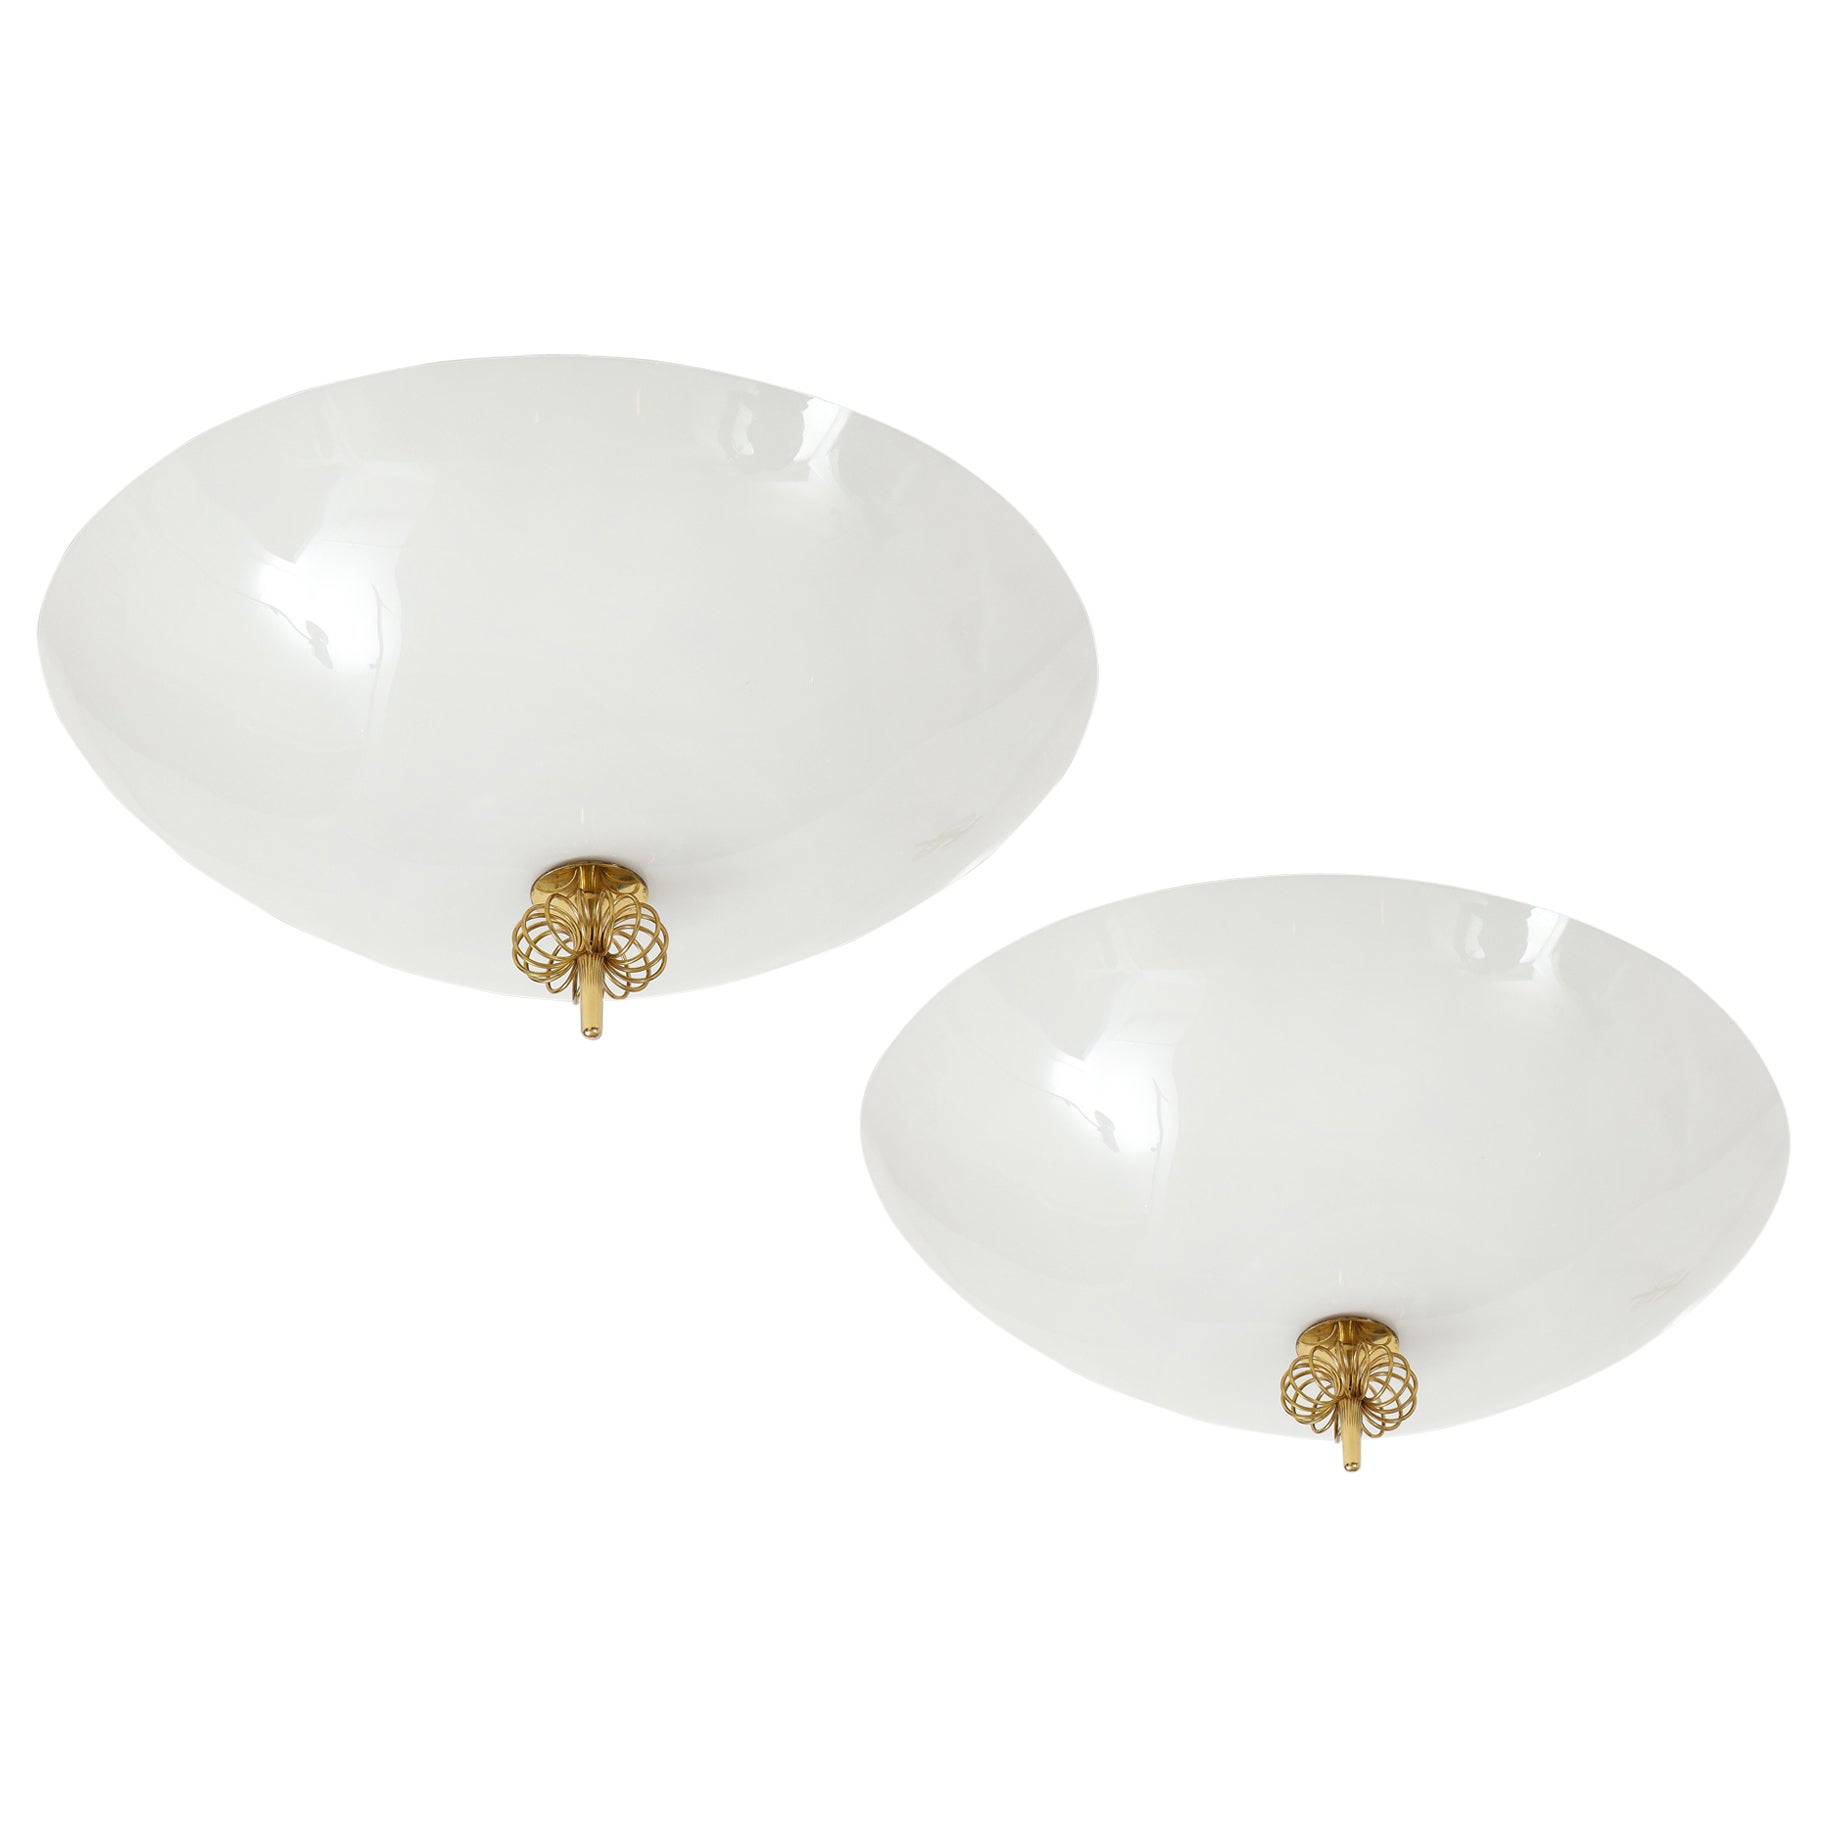 Paavo Tynell for Idman Oy rare and elegant flush mount ceiling lights with opaline glass dish shades with trademark central brass spiral decorations. Impressed with manufacturer's mark 